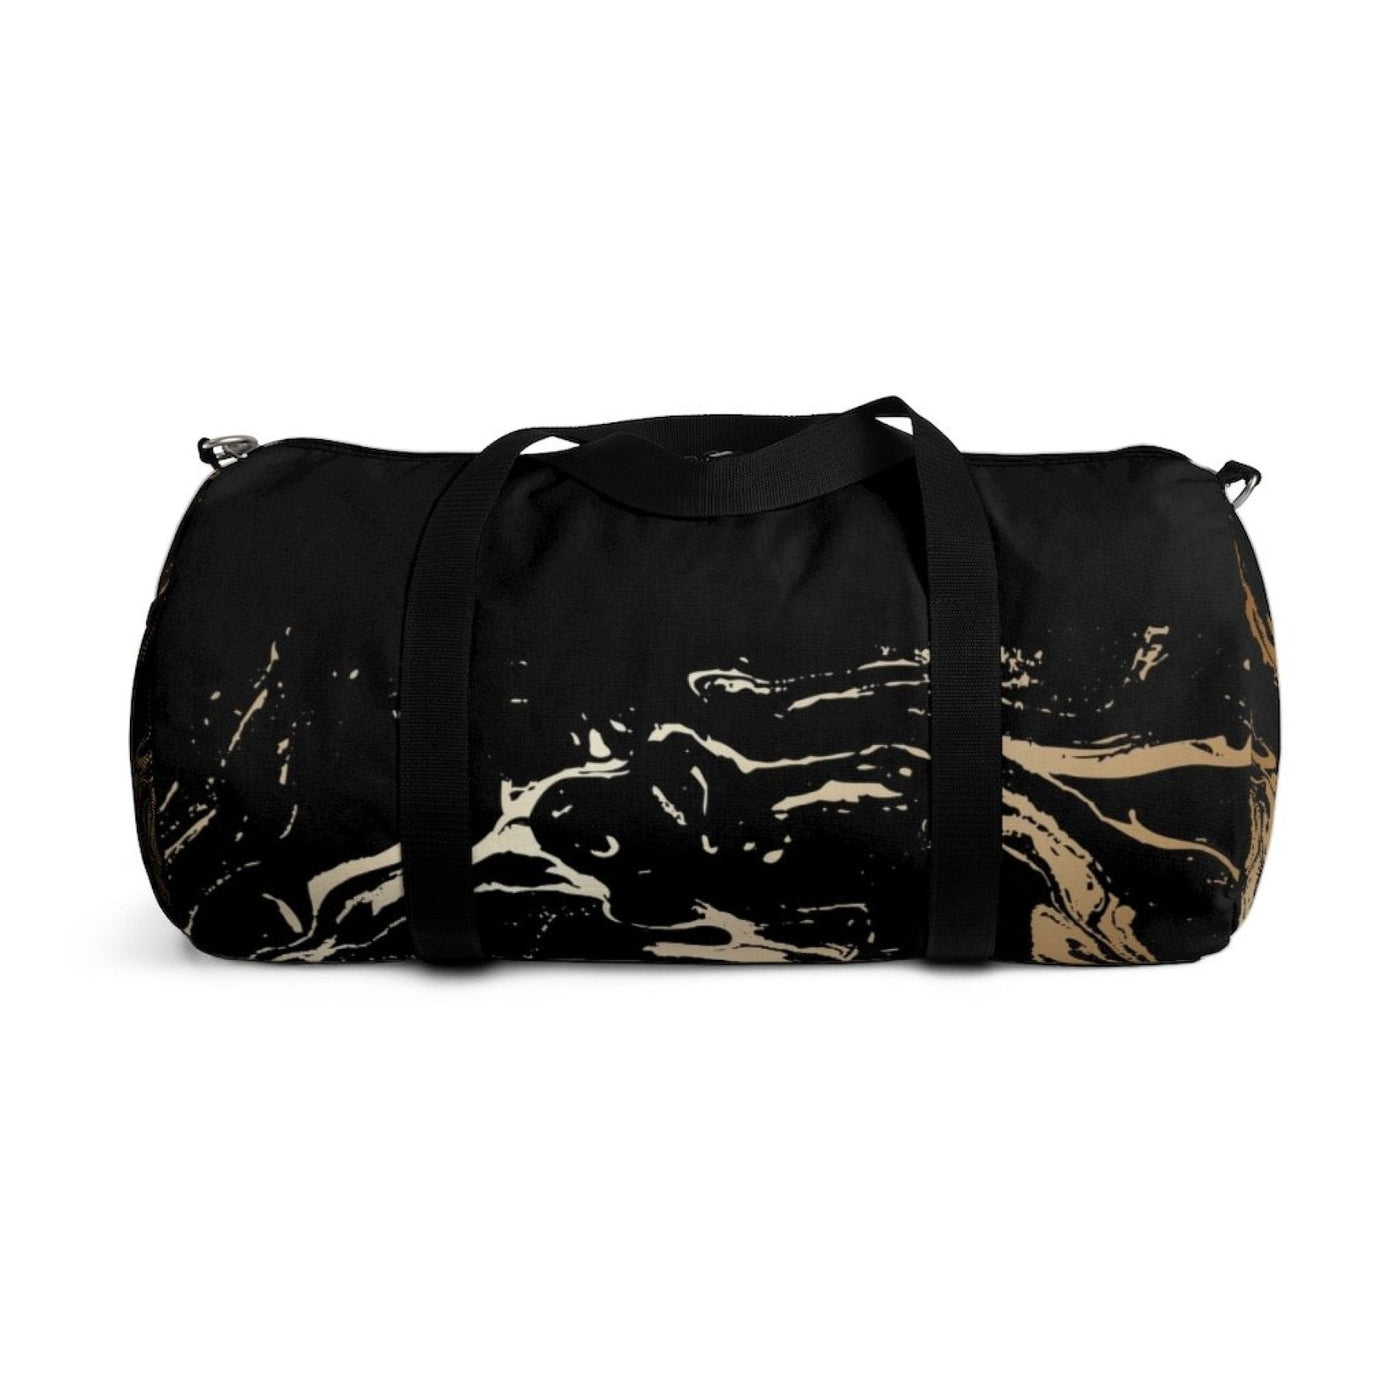 Duffel Bag Carry On Luggage Black And Gold - Bags | Duffel Bags